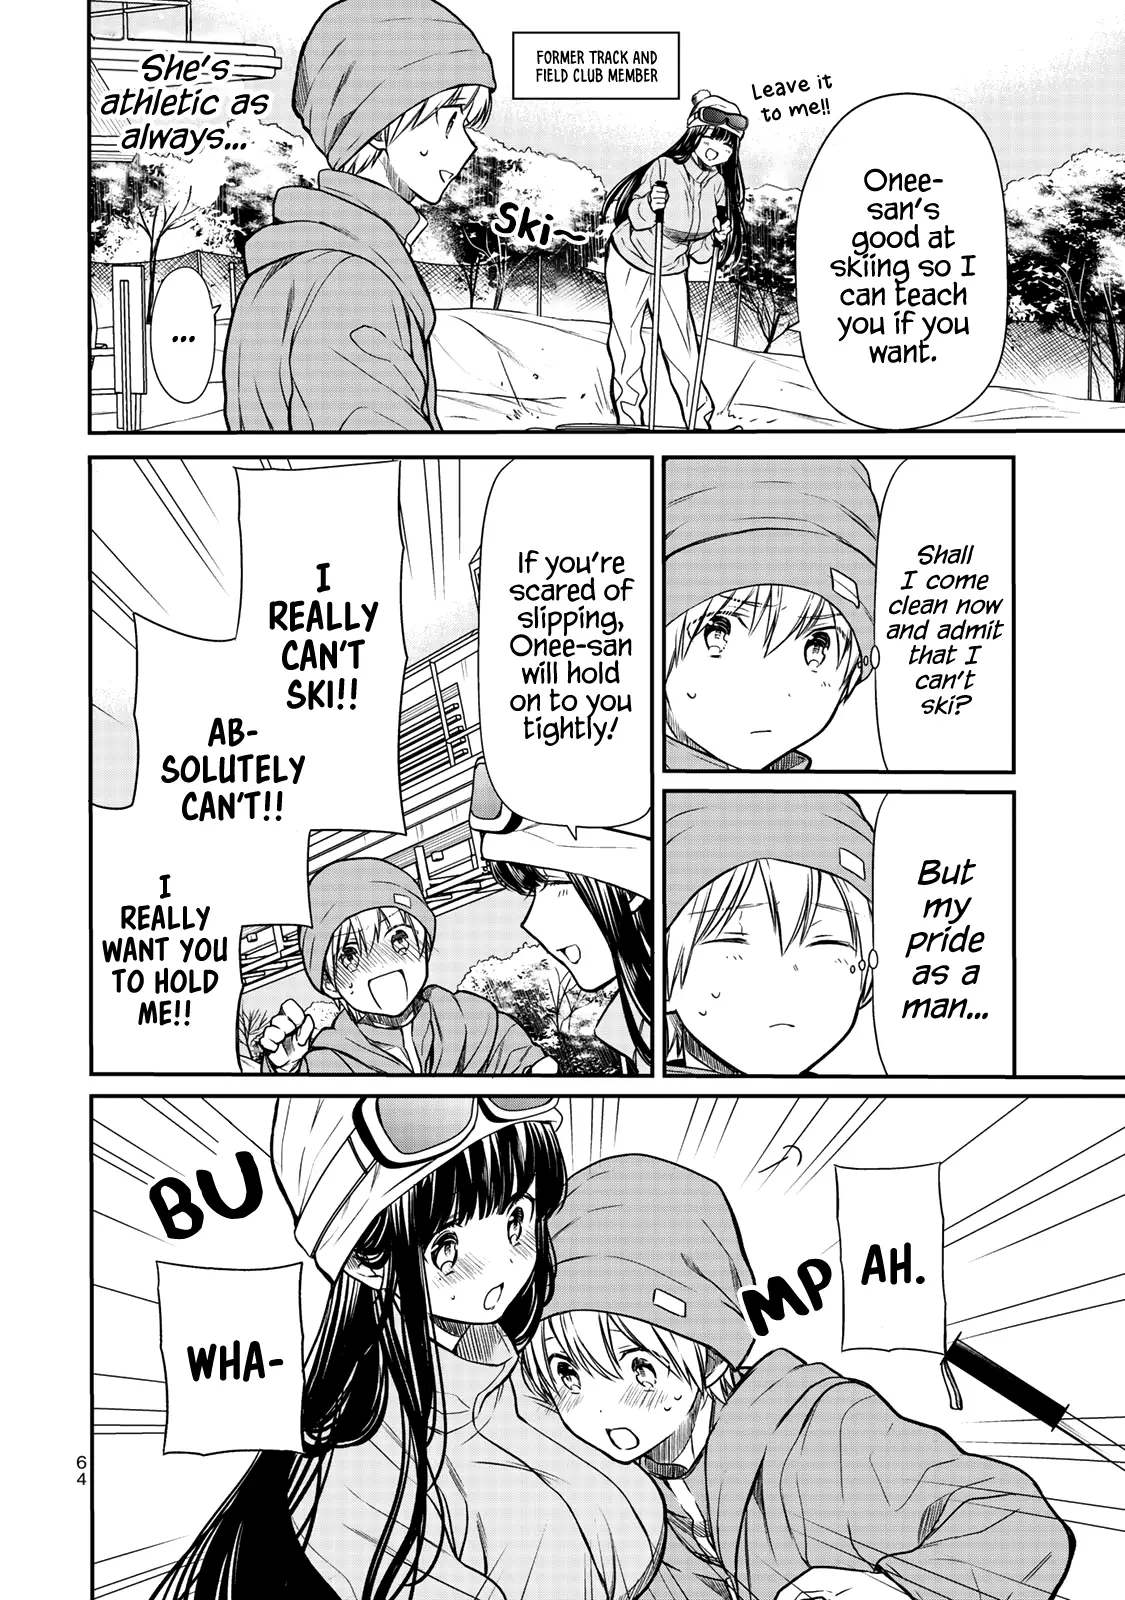 The Story Of An Onee-San Who Wants To Keep A High School Boy - 149 page 3